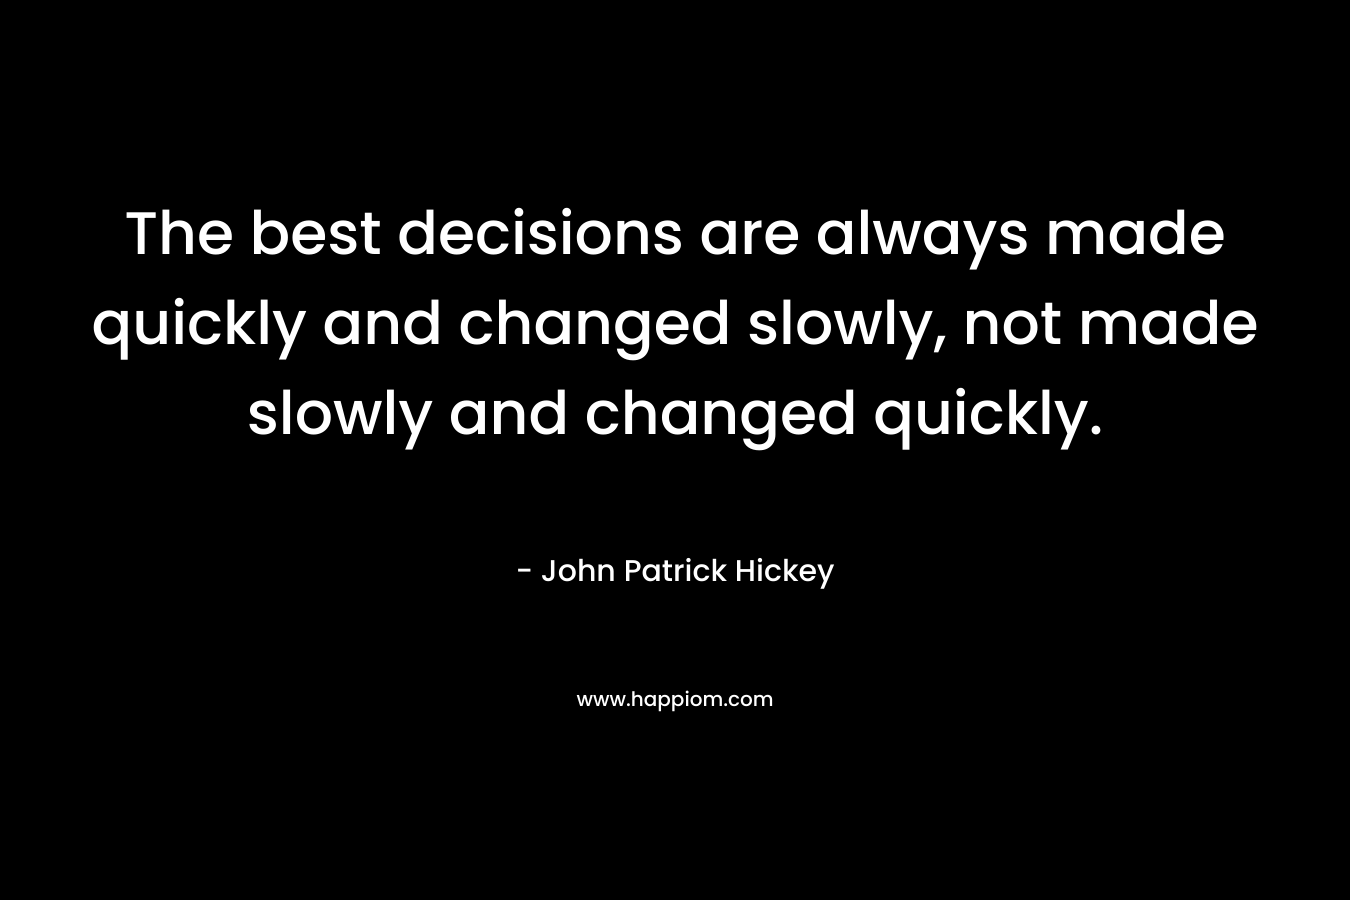 The best decisions are always made quickly and changed slowly, not made slowly and changed quickly.